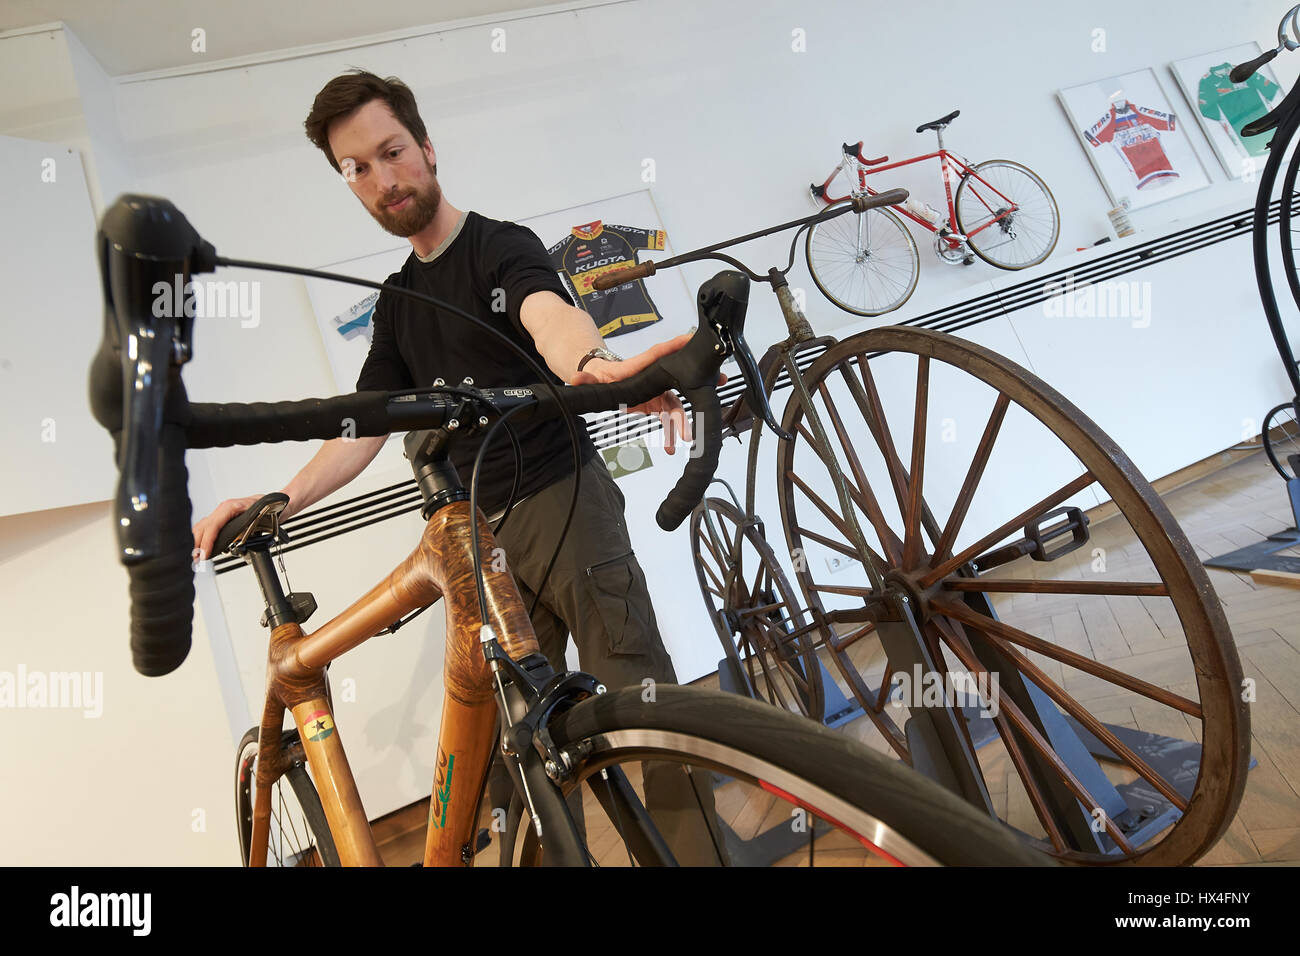 Koblenz, Germany. 20th Mar, 2017. A racing bicycle made from bamboo stands next to historical bikes in the exhibition 'Das Fahrrad - 200 Jahre Handwerk auf Raedern' (lit. The bicycle - 200 years of handicraft on wheels) in Koblenz, Germany, 20 March 2017. The special exhibition marking the 200th birthday of the bicycle will feature some 45 bikes until 07 April. Photo: Thomas Frey/dpa/Alamy Live News Stock Photo